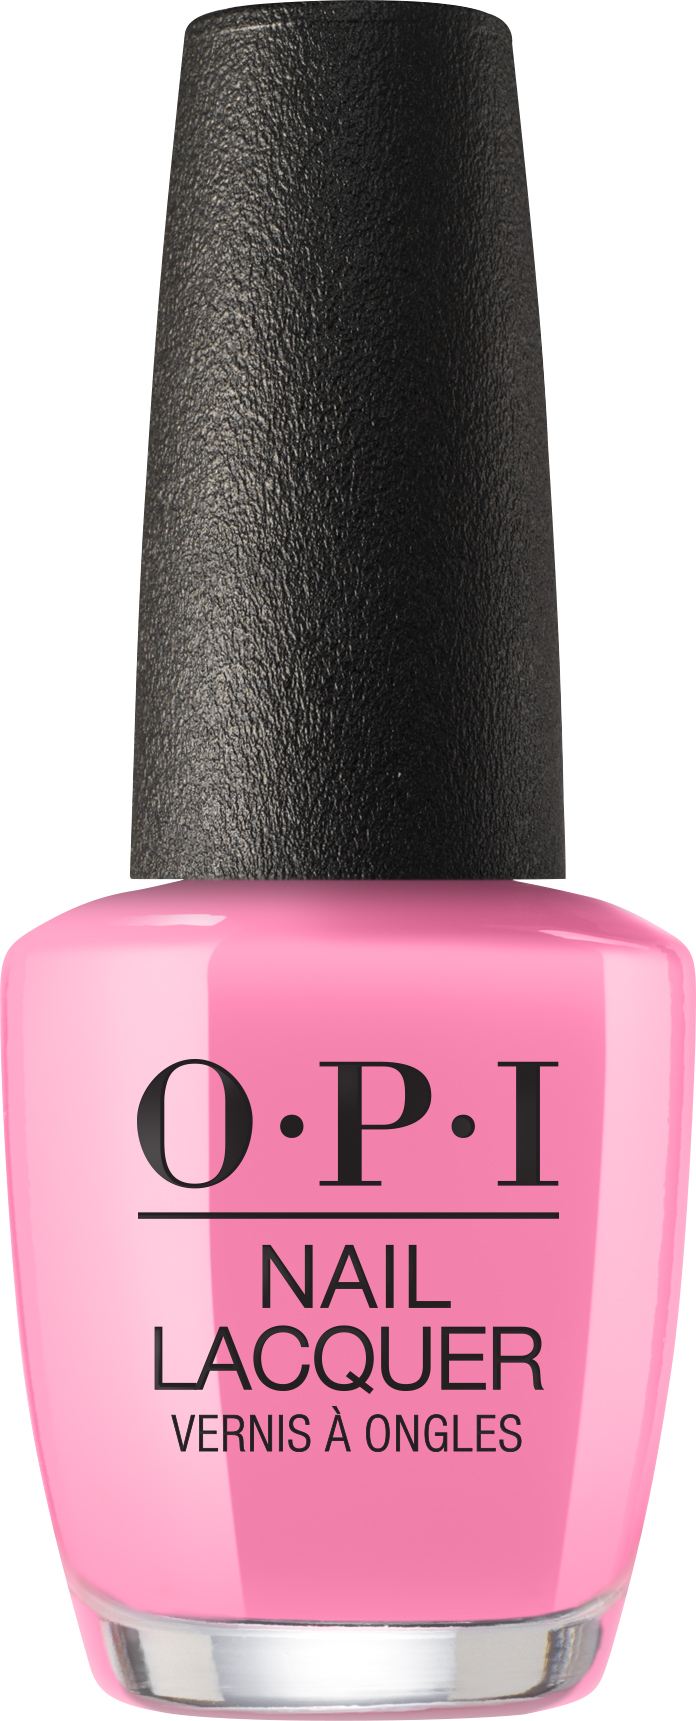 OPI Nail Lacquer Peru Collection lakier do paznokci 15 ml Nr. nlp30 - lima tell you about this color!